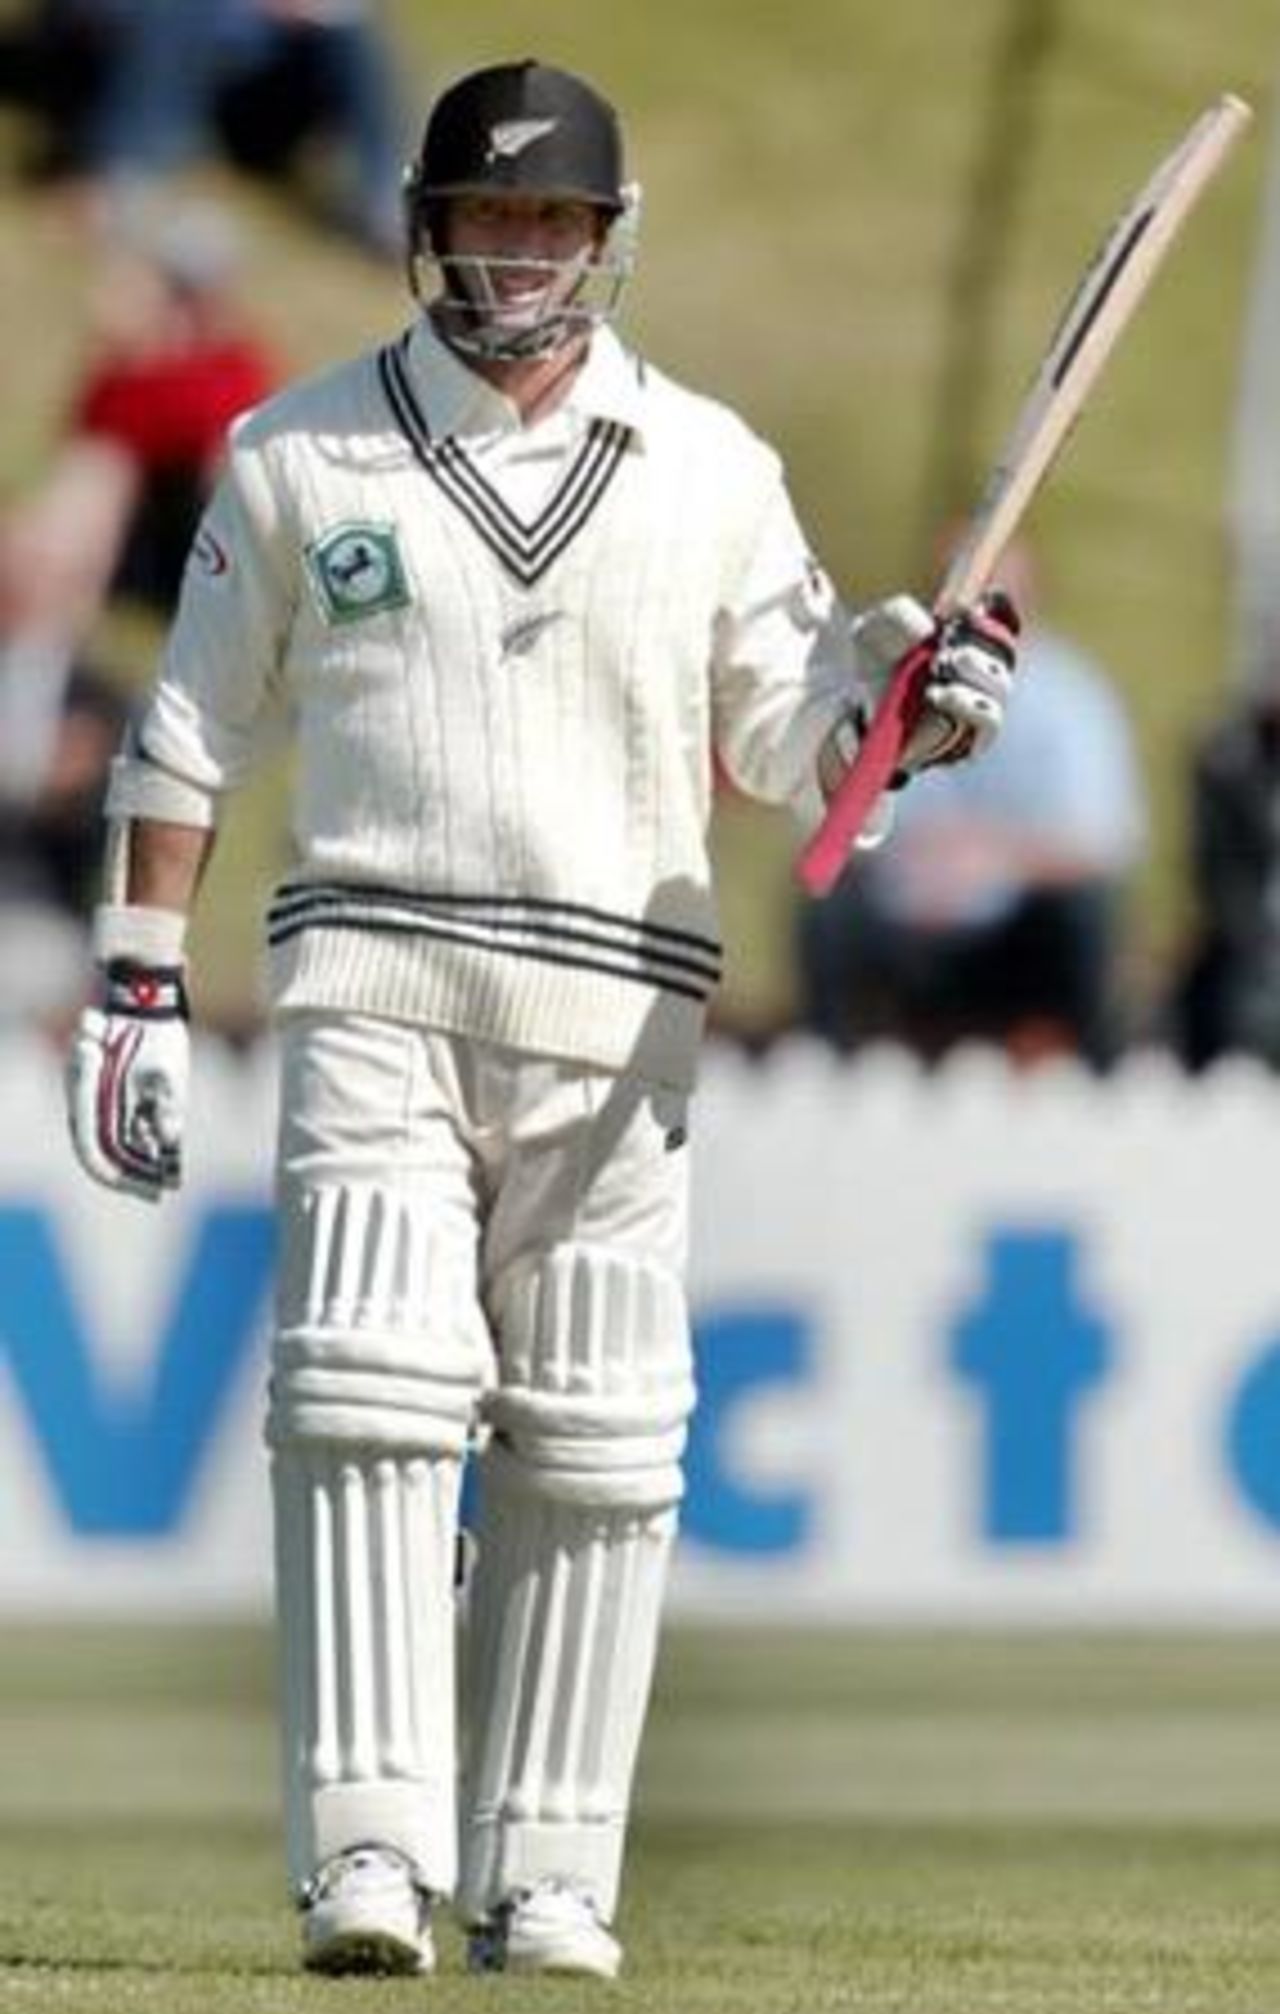 New Zealand batsman Mark Richardson raises his bat to celebrate reaching fifty in the first innings. Richardson ended the second day's play on 83 not out. 1st Test: New Zealand v India at Basin Reserve, Wellington, 12-16 December 2002 (13 December 2002).